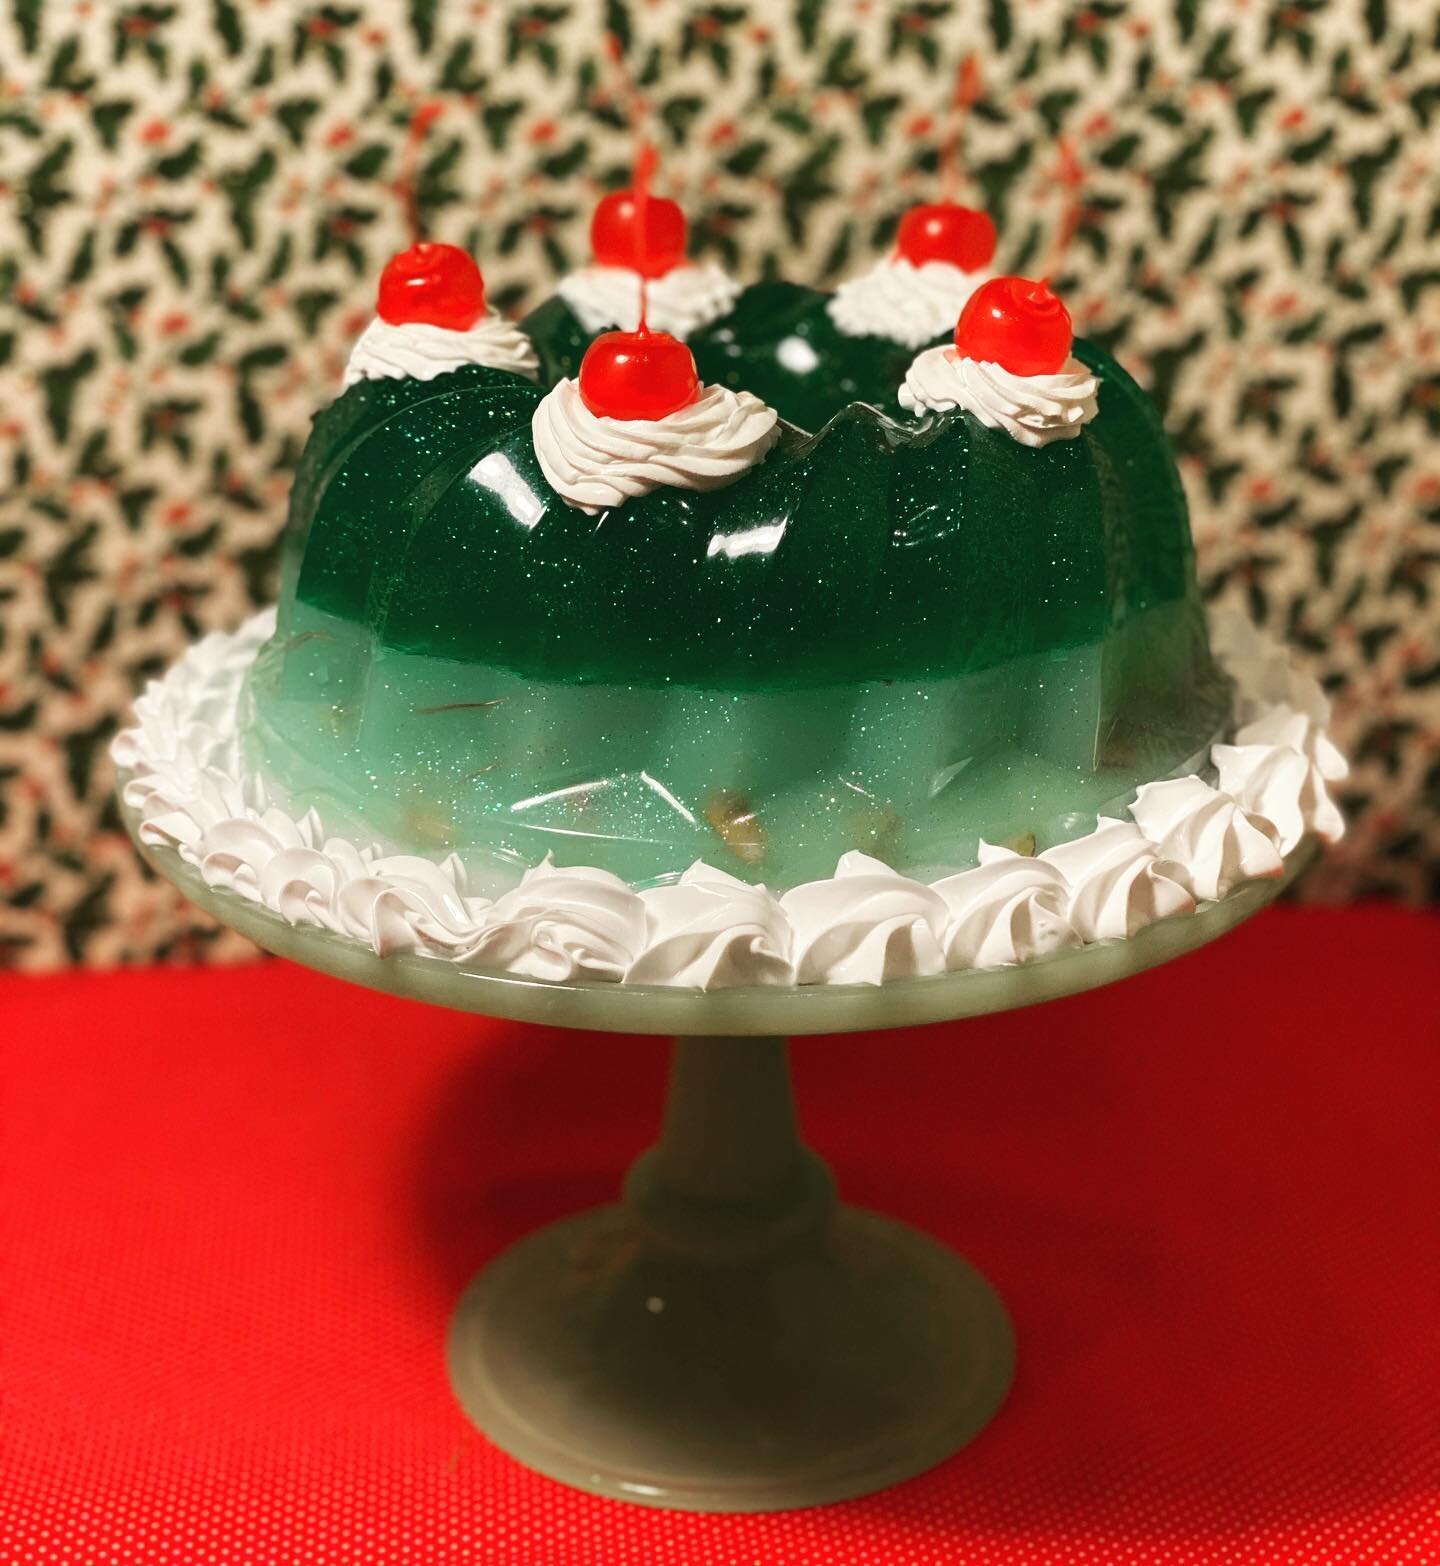 *SOLD* Even if you&rsquo;re a humbug like me, it&rsquo;s hard to resist a Jell-O dessert as pretty as this during the Holidays! This holiday ring is comprised of a mint julep JellO layer over a creamy pistachio pudding platform. Be as creative as you